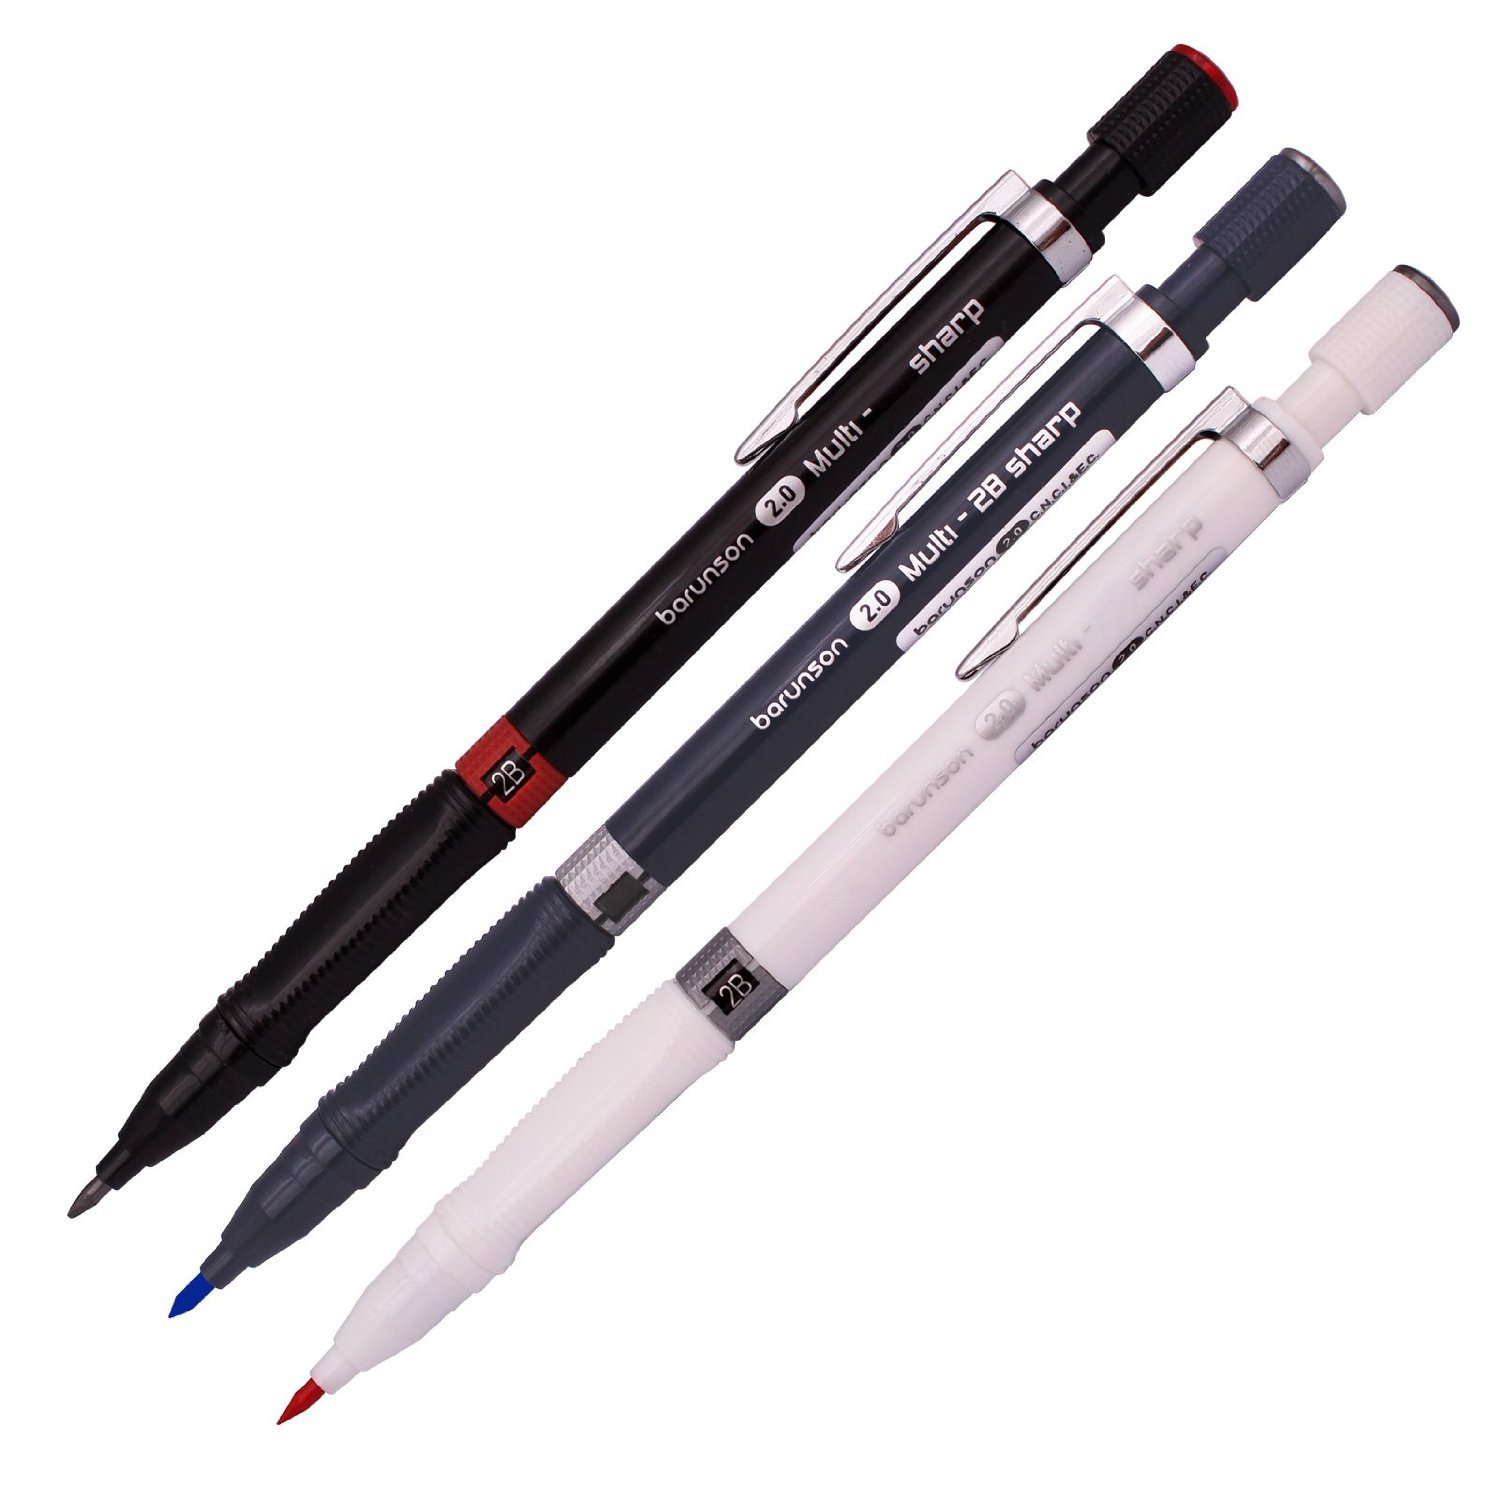 The Best Mechanical Pencils for Drawing & Sketching in 2021